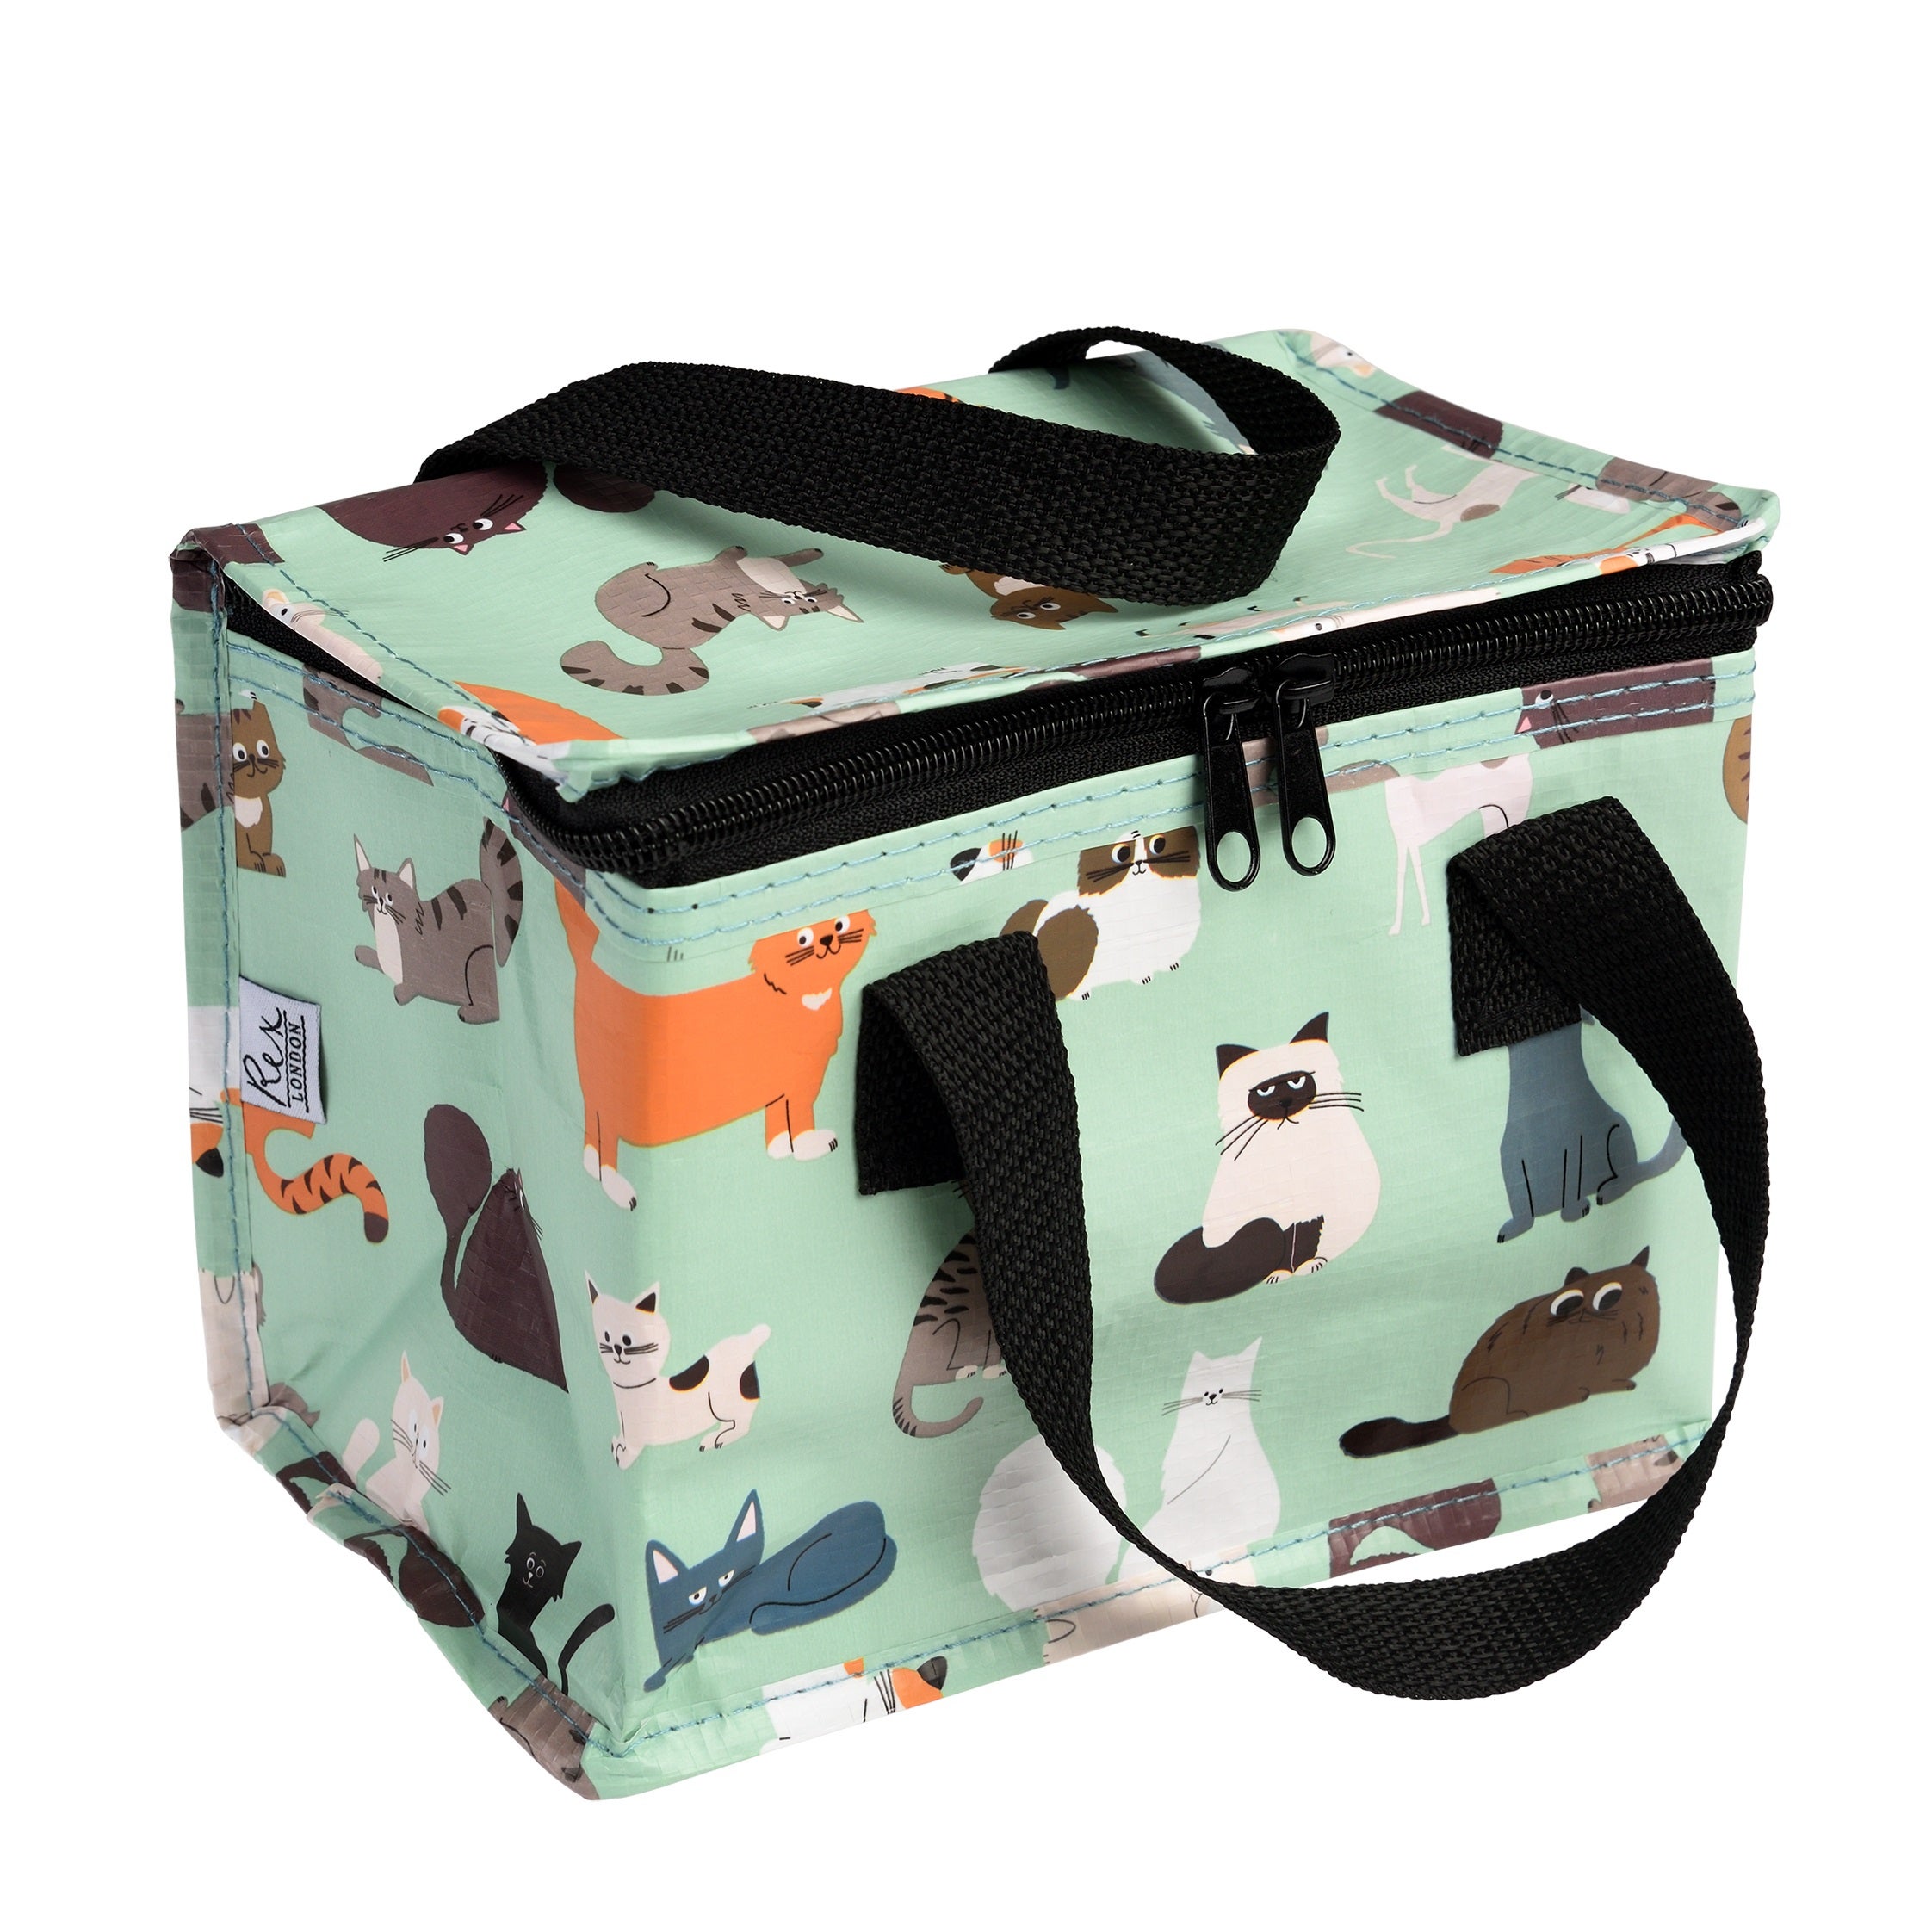 Rex London Nine Lives Insulated Lunch Bag